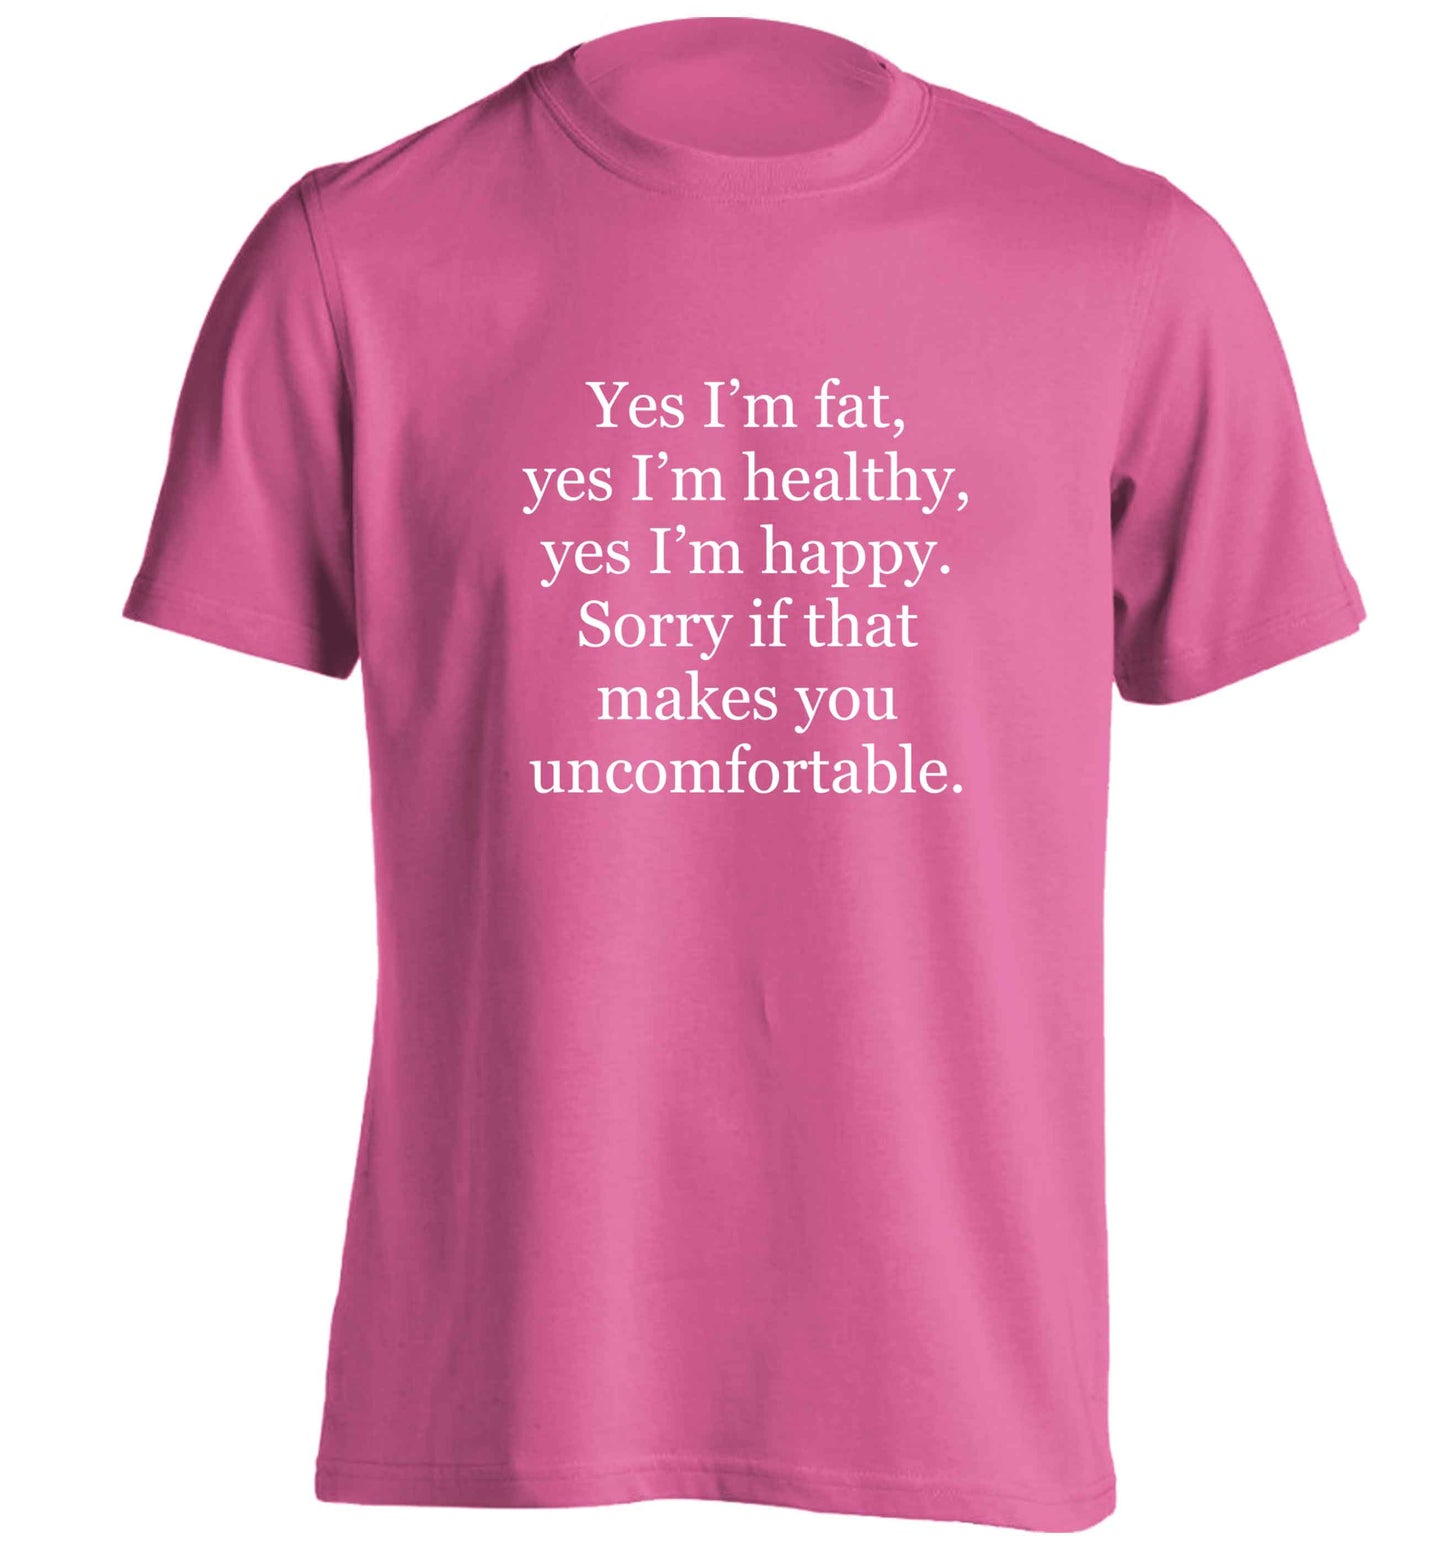 Yes I'm fat, yes I'm healthy, yes I'm happy. Sorry if that makes you uncomfortable adults unisex pink Tshirt 2XL